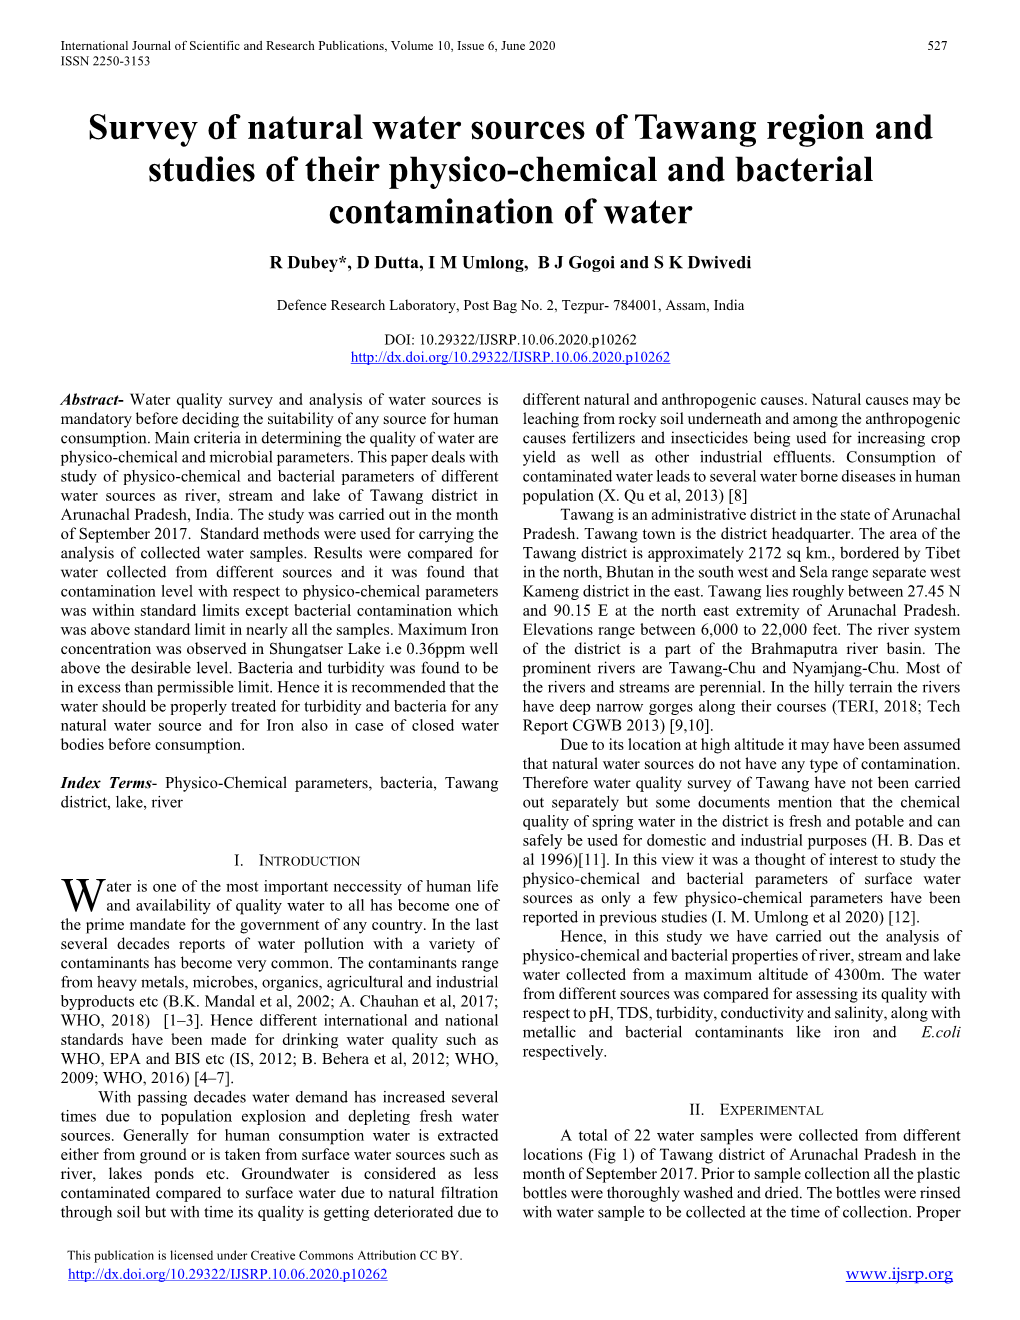 Survey of Natural Water Sources of Tawang Region and Studies of Their Physico-Chemical and Bacterial Contamination of Water